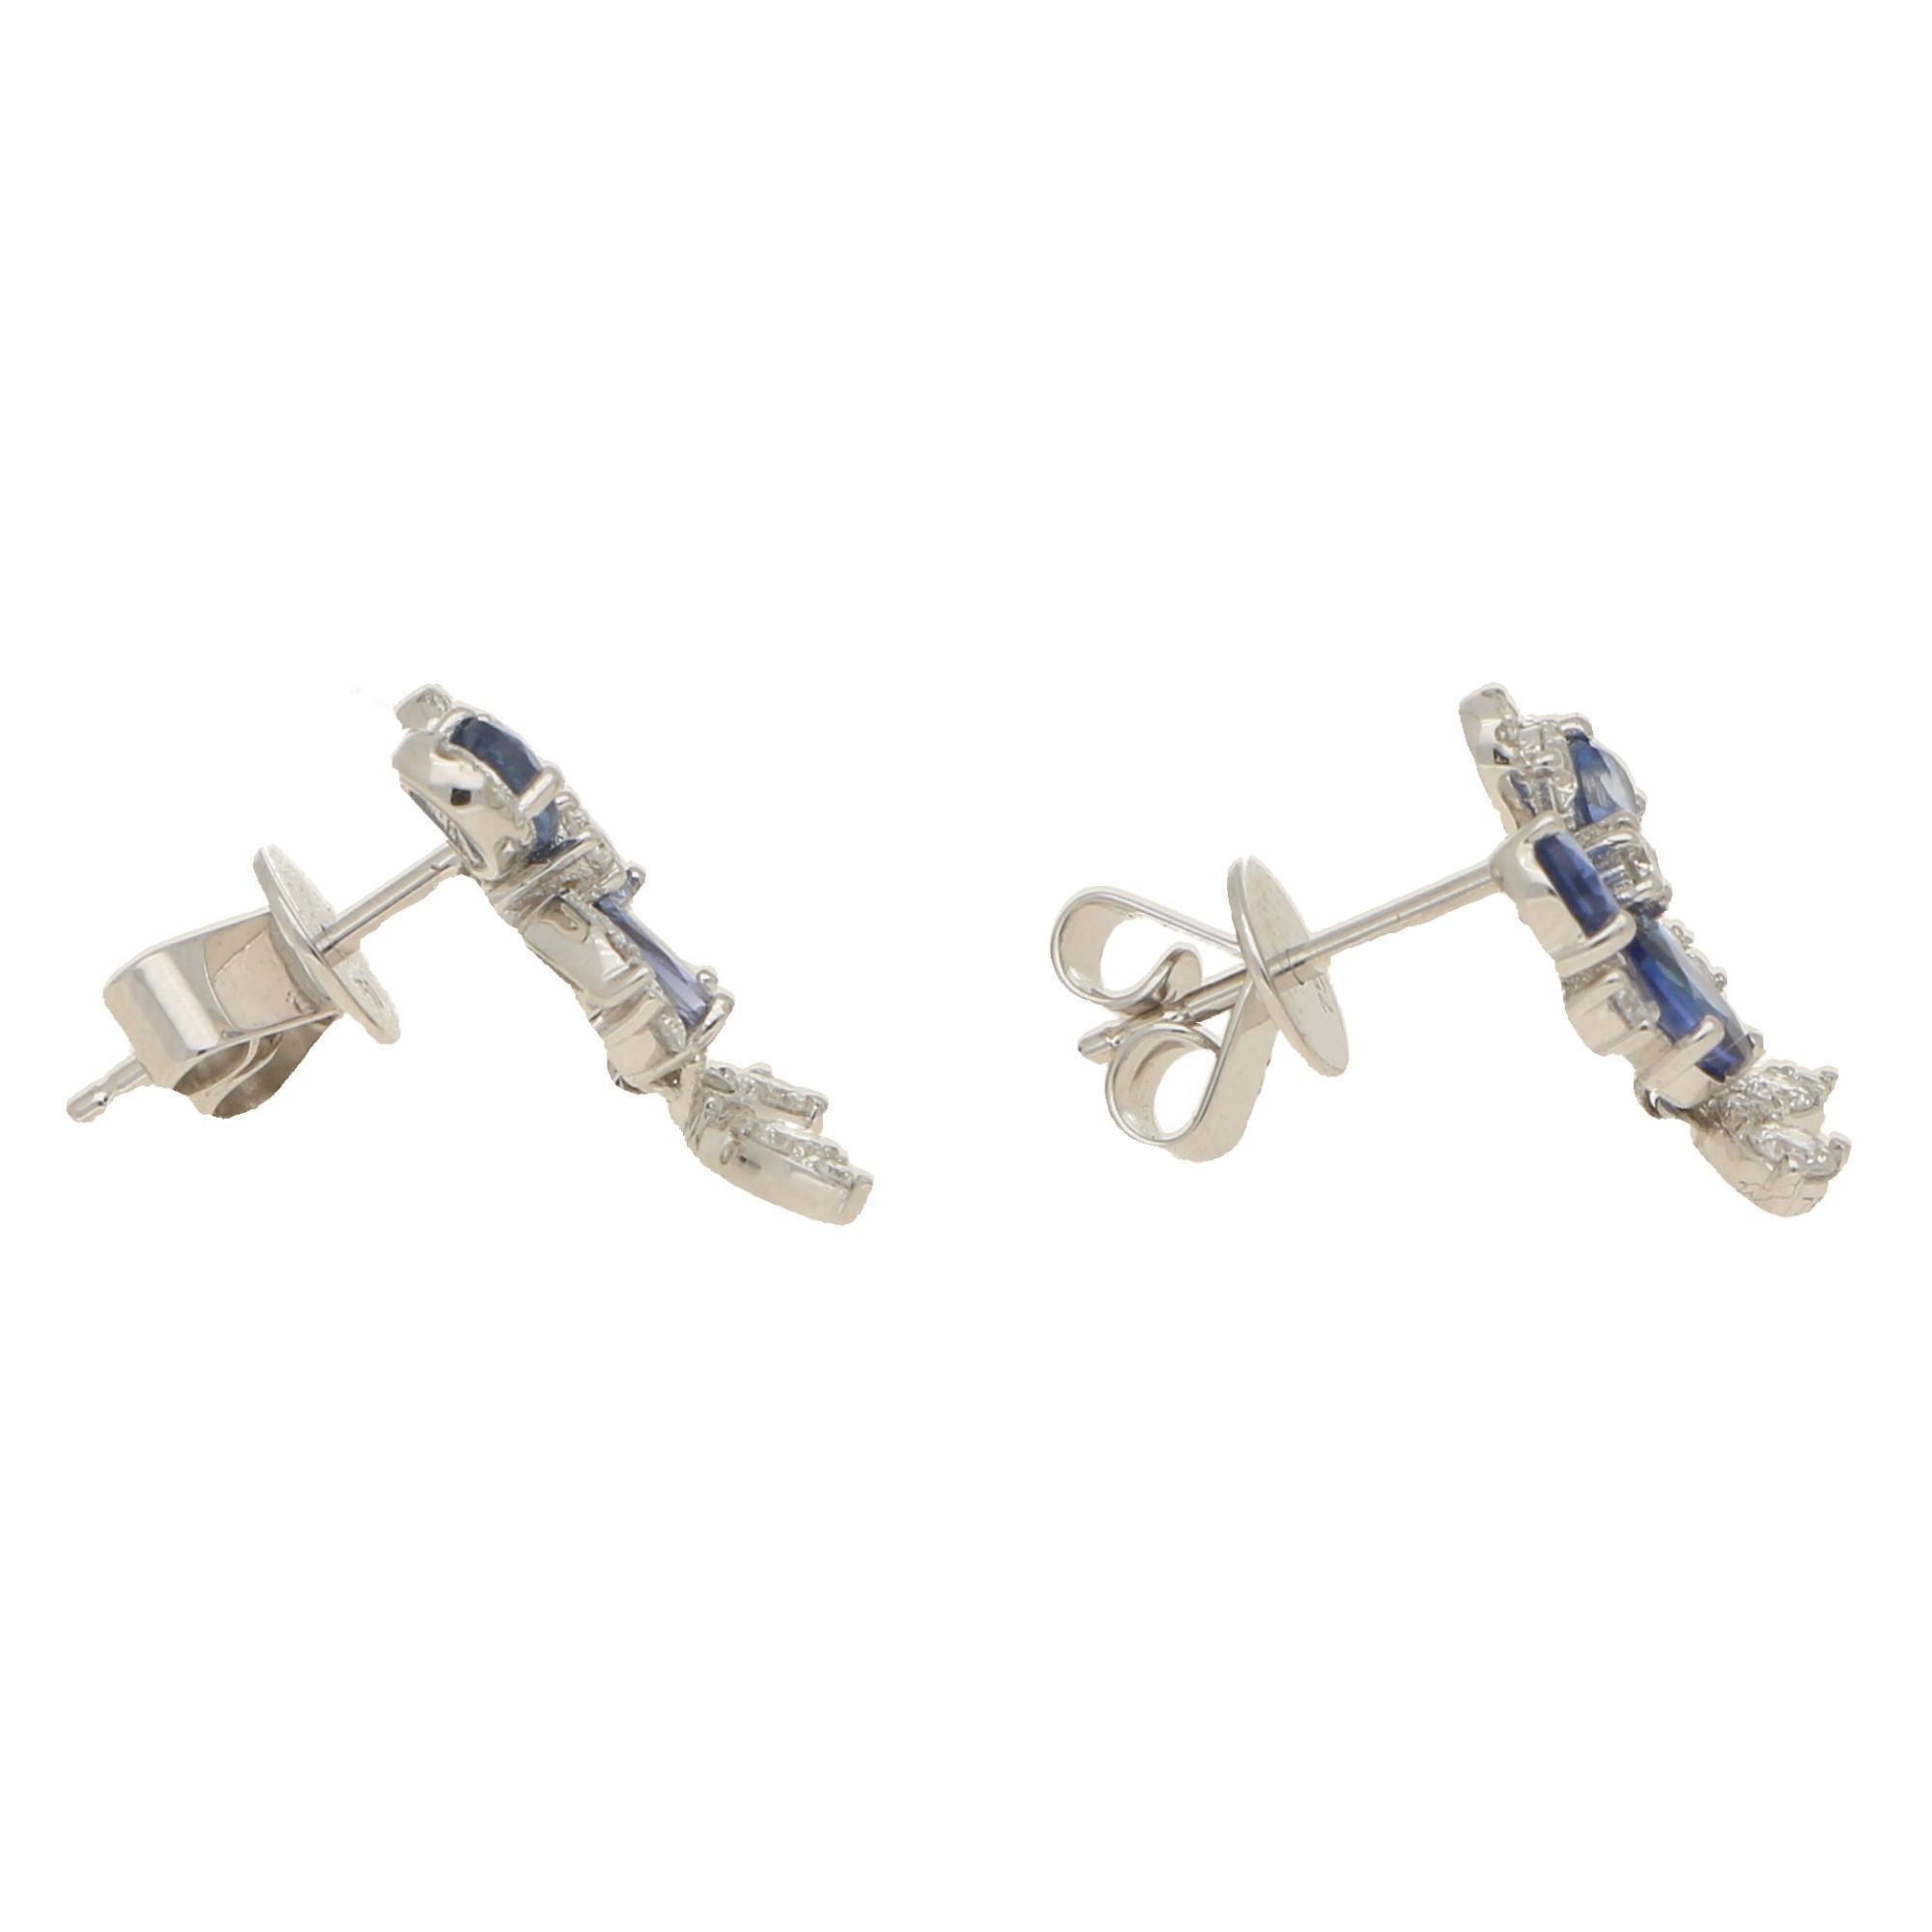 Sapphires 1.54cts, diamonds 0.49cts, G/H colour and VS clarity.
A sweet pair of sapphire and diamond daisy motif drop earrings set in 18 carat white gold. The main section of the earrings are comprised of three pear cut sapphires which  then